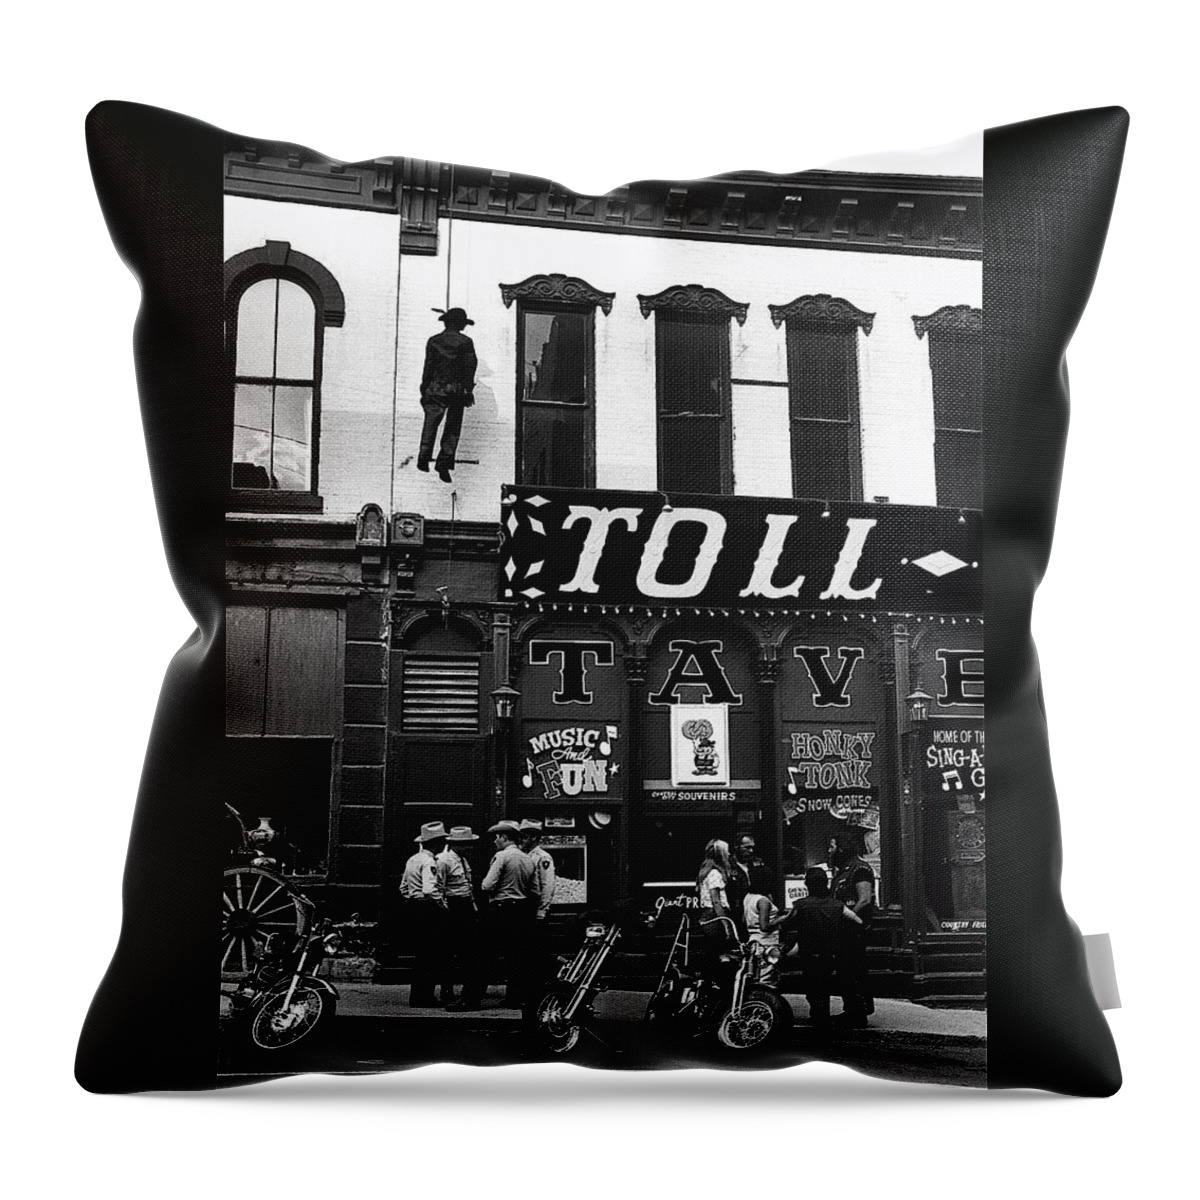 William S. Hart Homage The Toll Gate 1920 Toll Gate Saloon Central City Co 1971 Throw Pillow featuring the photograph William S. Hart Homage The Toll Gate 1920 Toll Gate Saloon Central City Co 1971-2009 by David Lee Guss